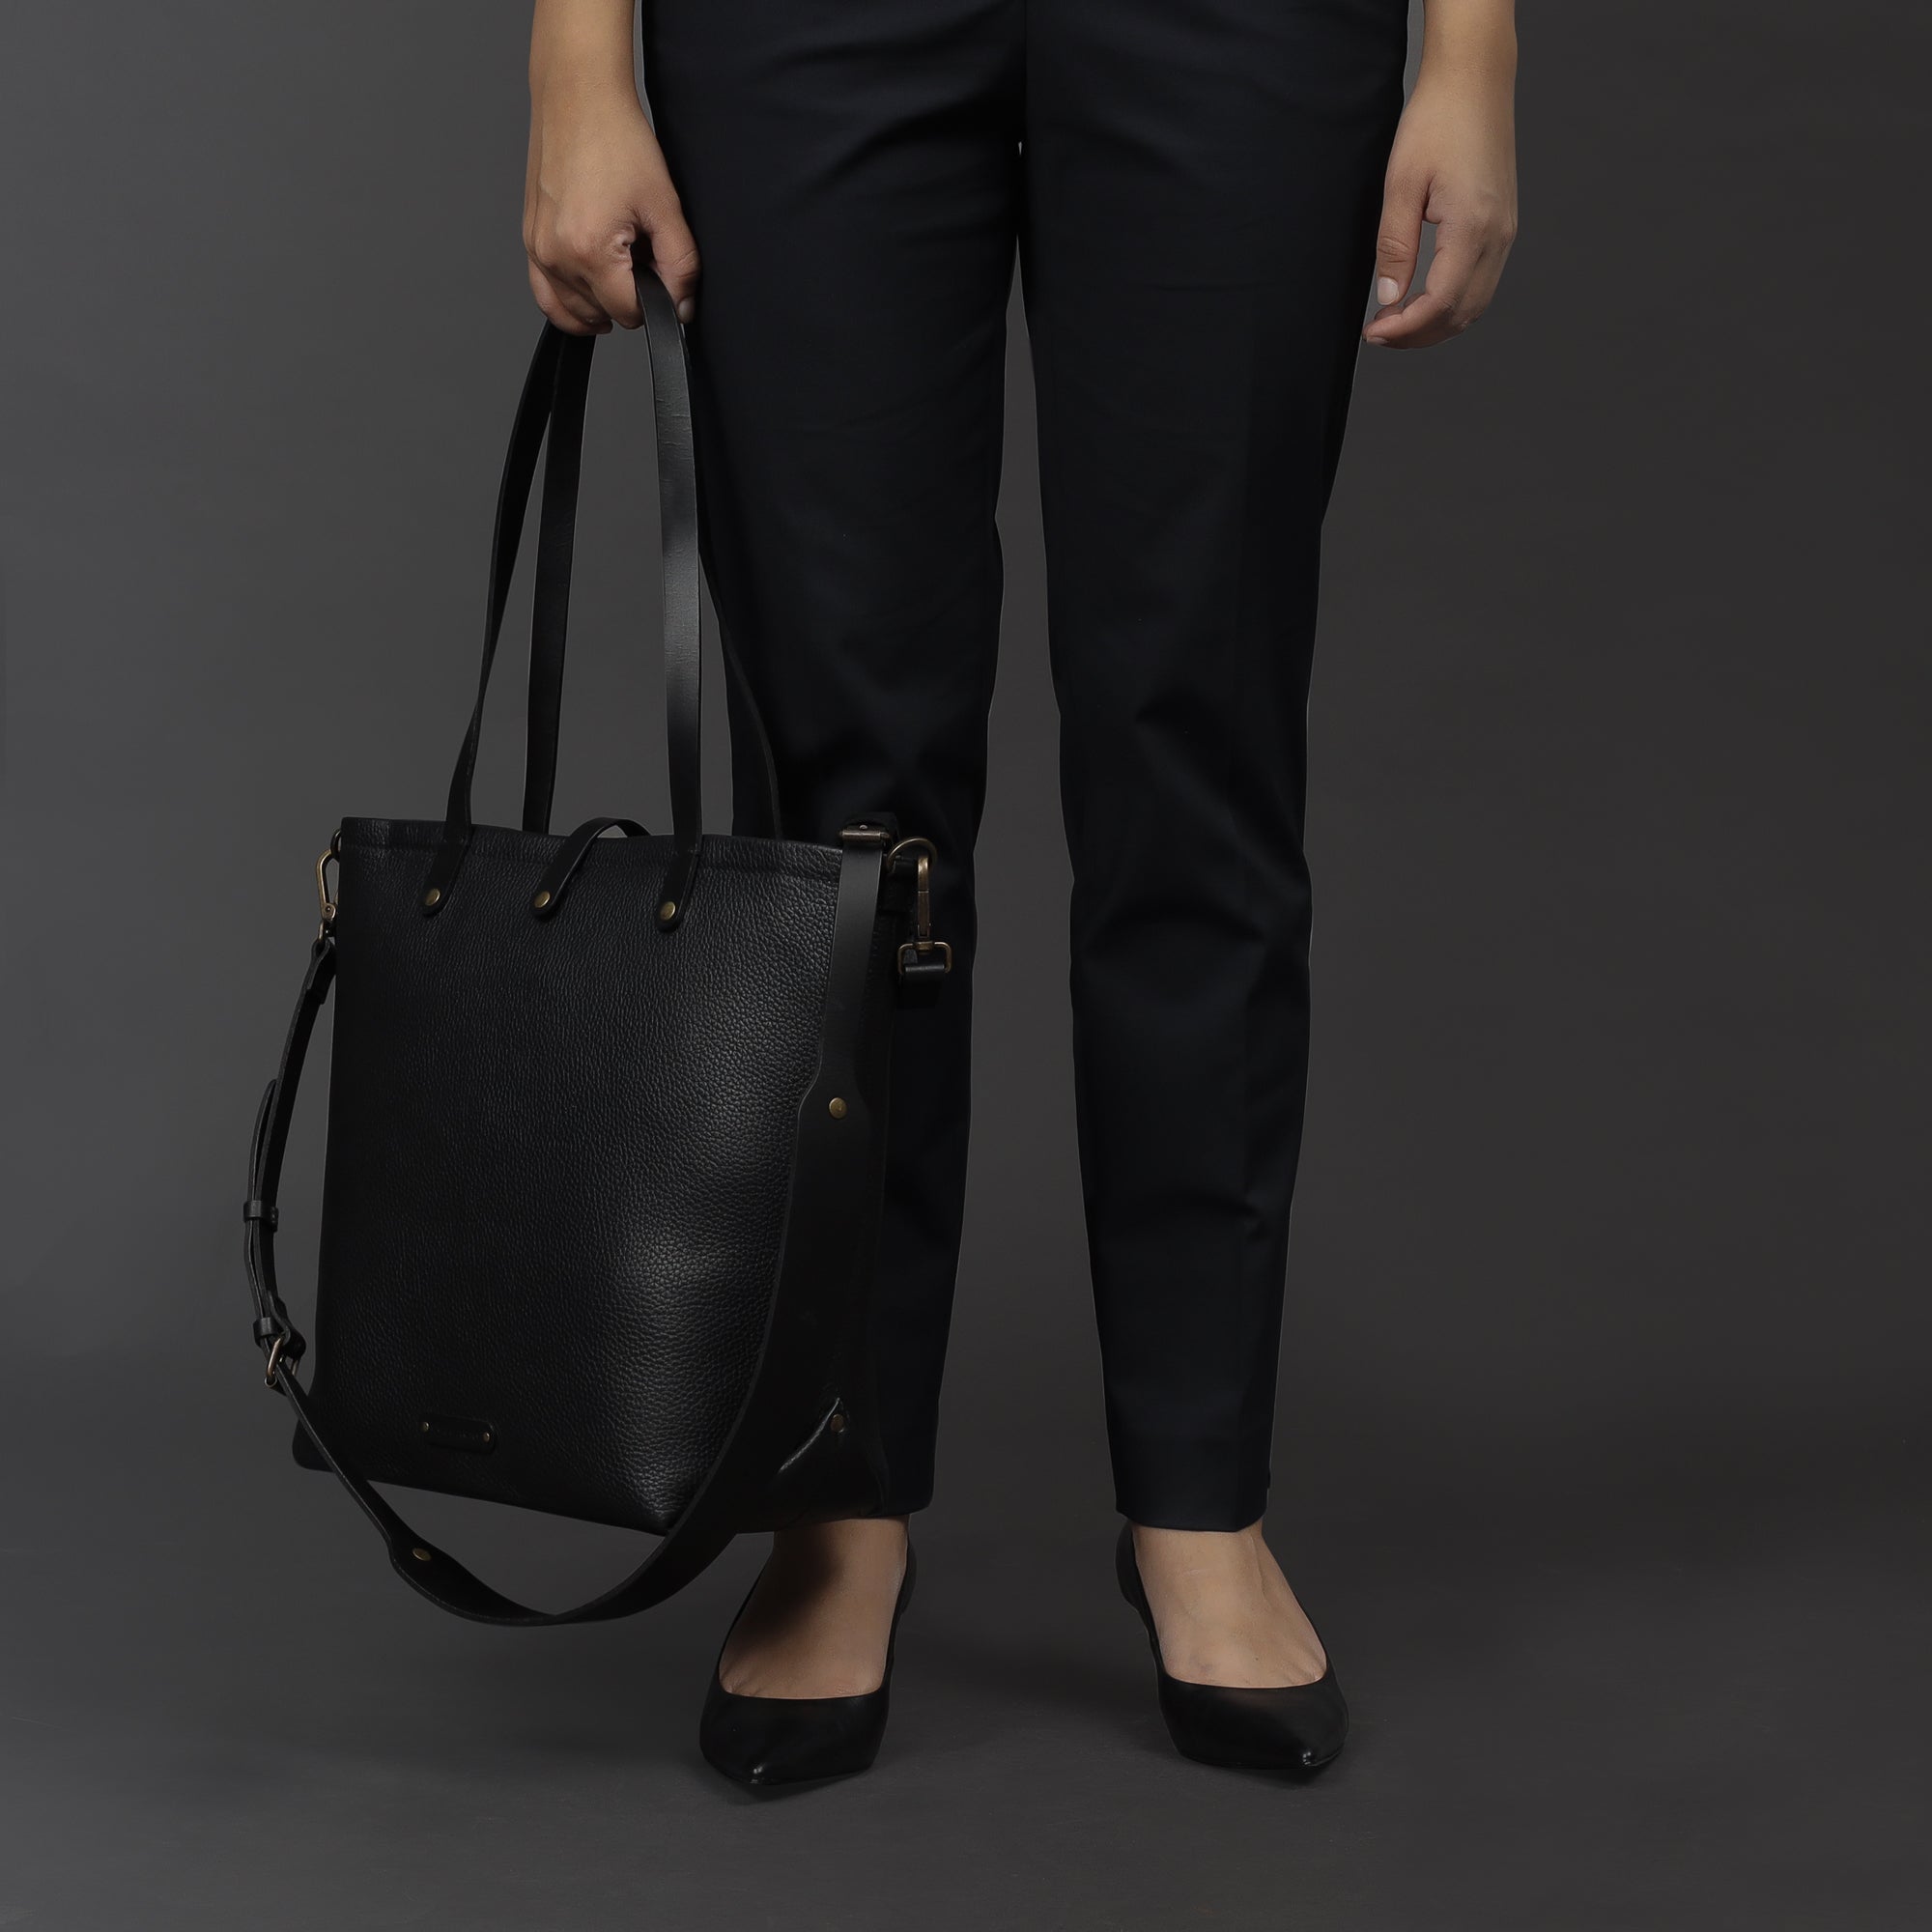 Leather tote working women